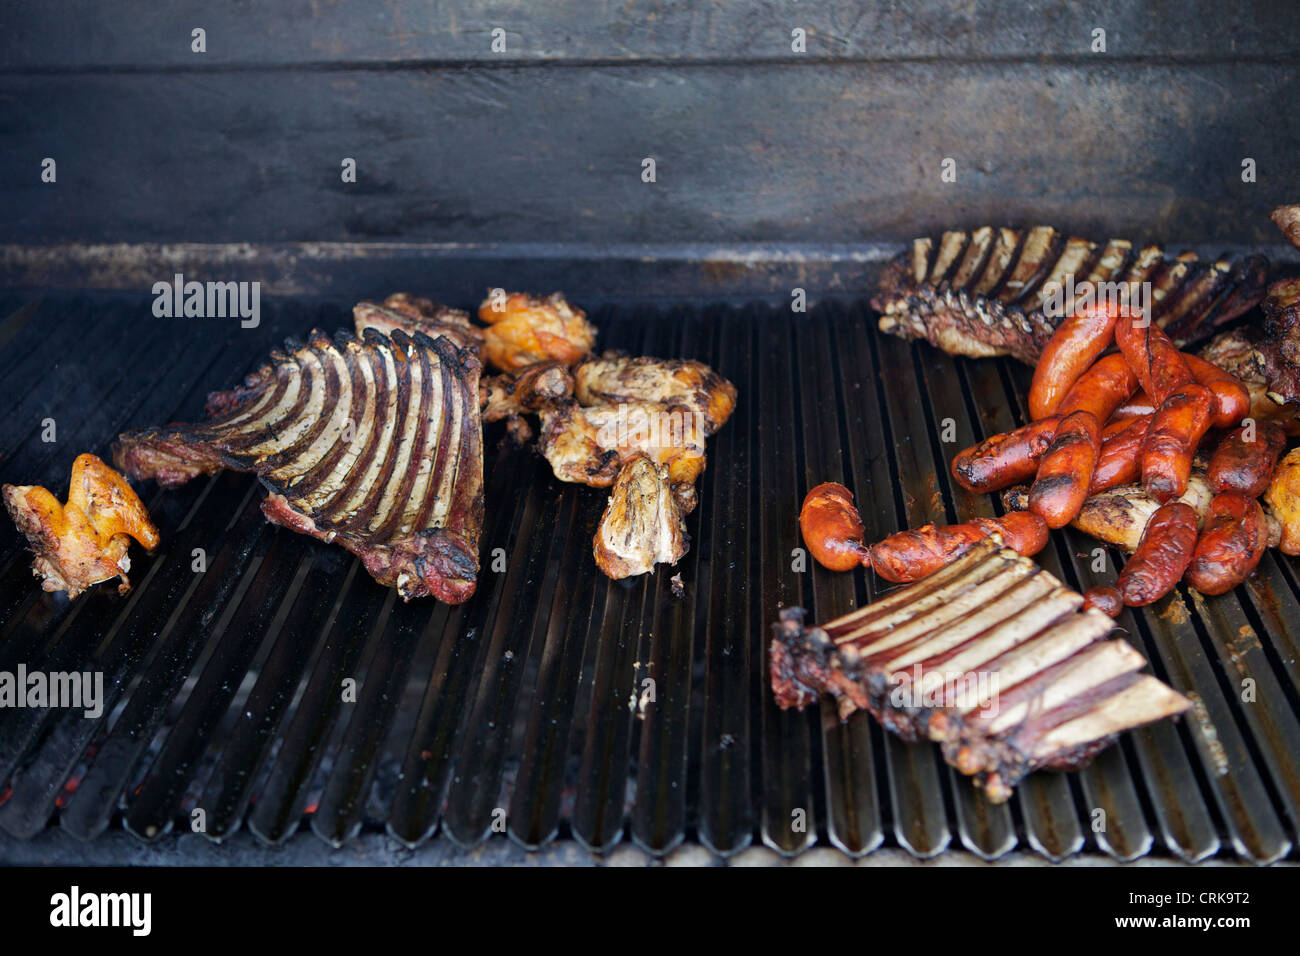 Barbecue ribs chicken and sausages, Uyuni, Bolivia, South America Stock Photo